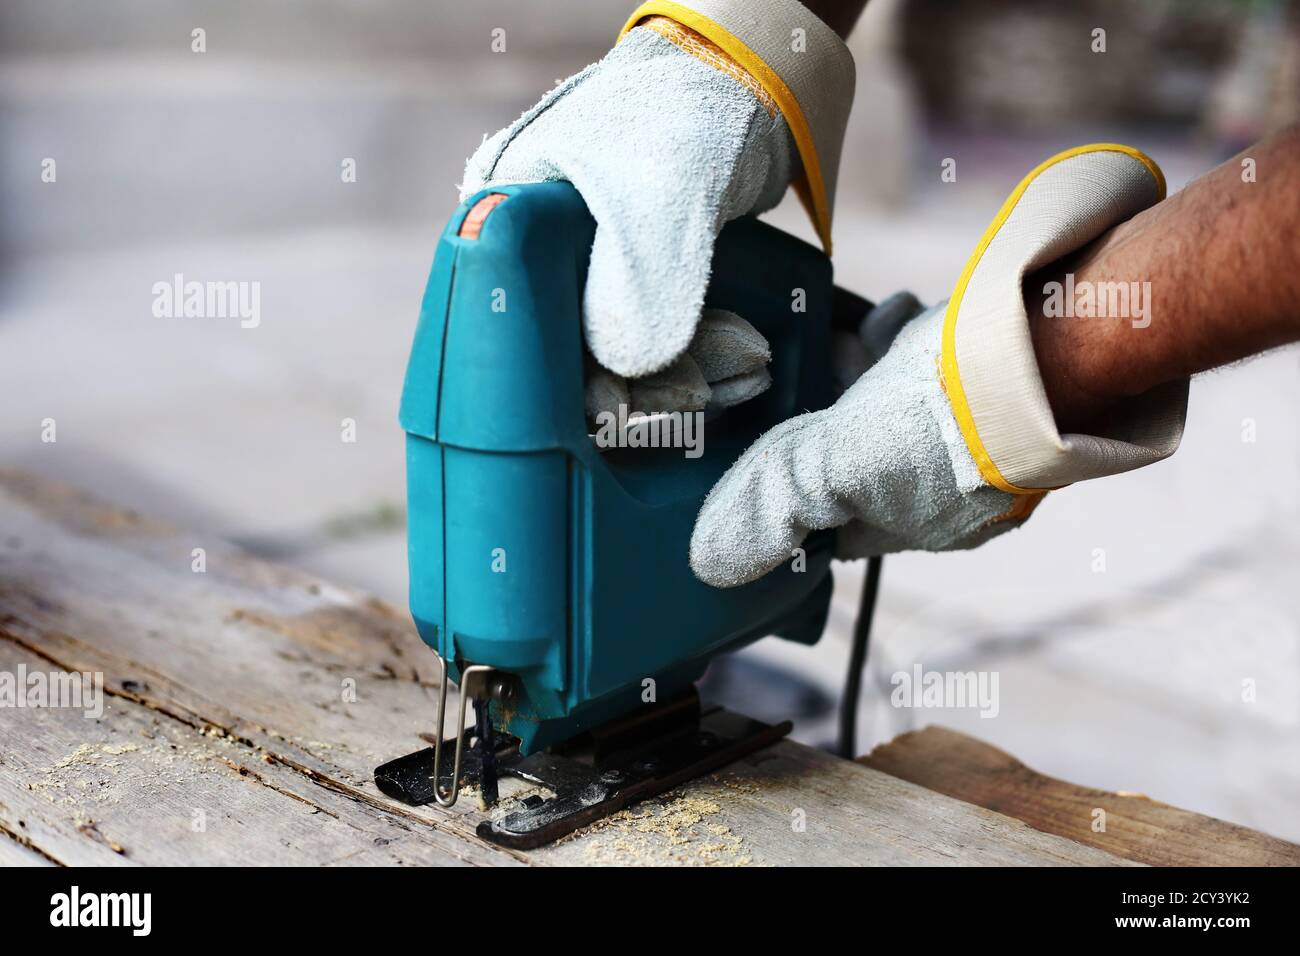 Carpenter with fretsaw at outdoor work. close-up. Construction details of male worker or handy man with power tools. Stock Photo